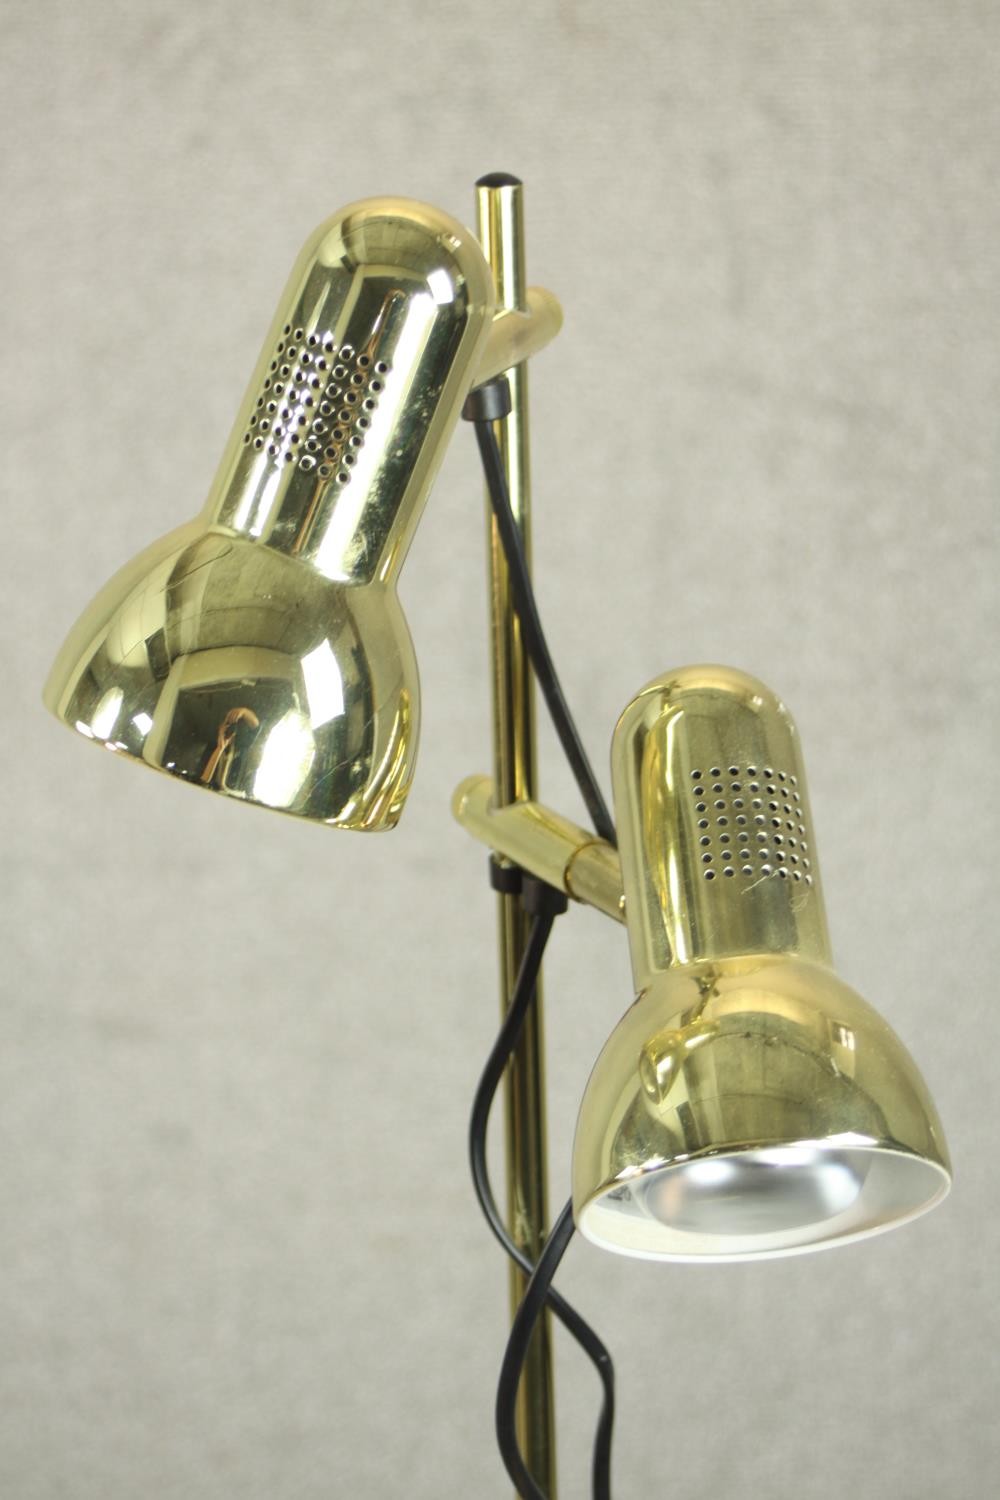 A polished brass adjustable twin spotlight floor standing lamp. H.144 Dia.27cm. - Image 3 of 5